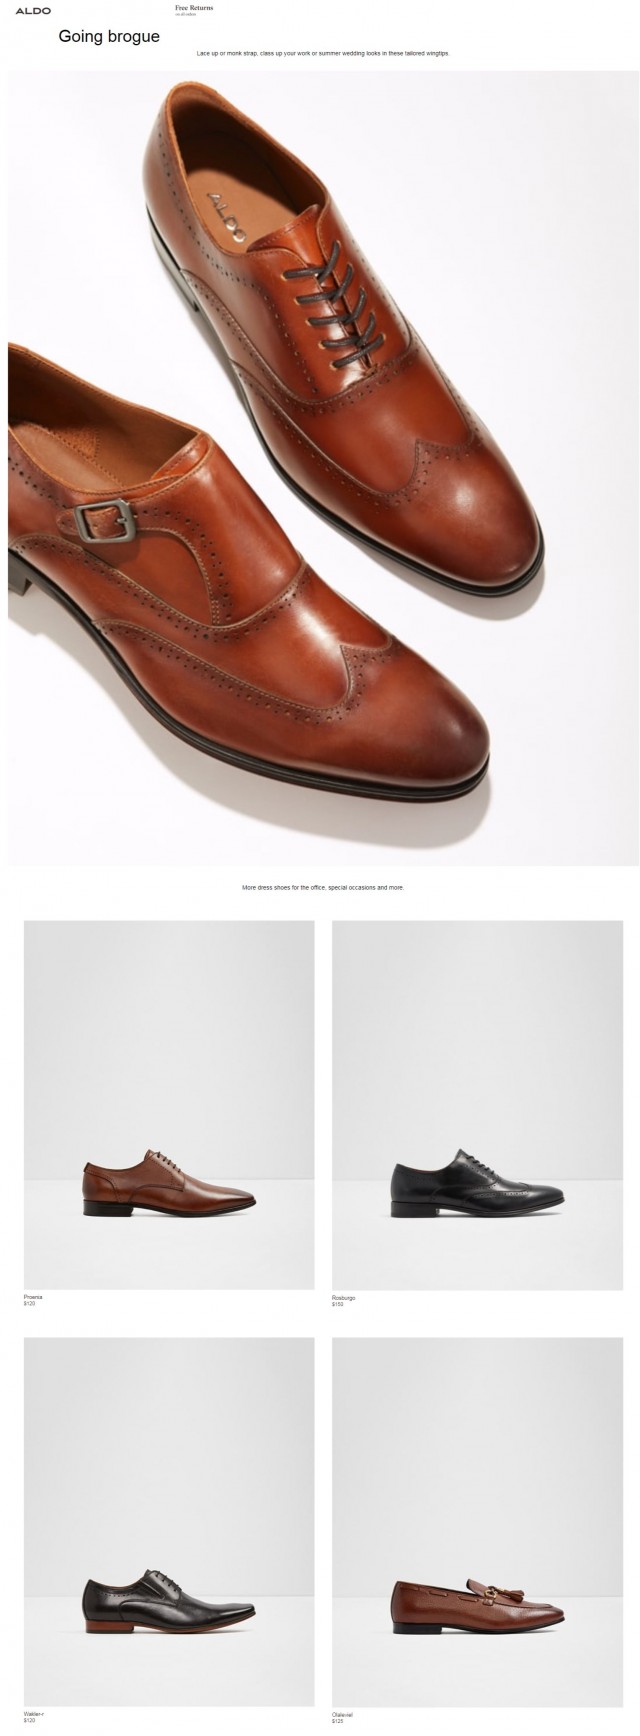 Coupon for: ALDO - These dress shoes will make you look like a million bucks.